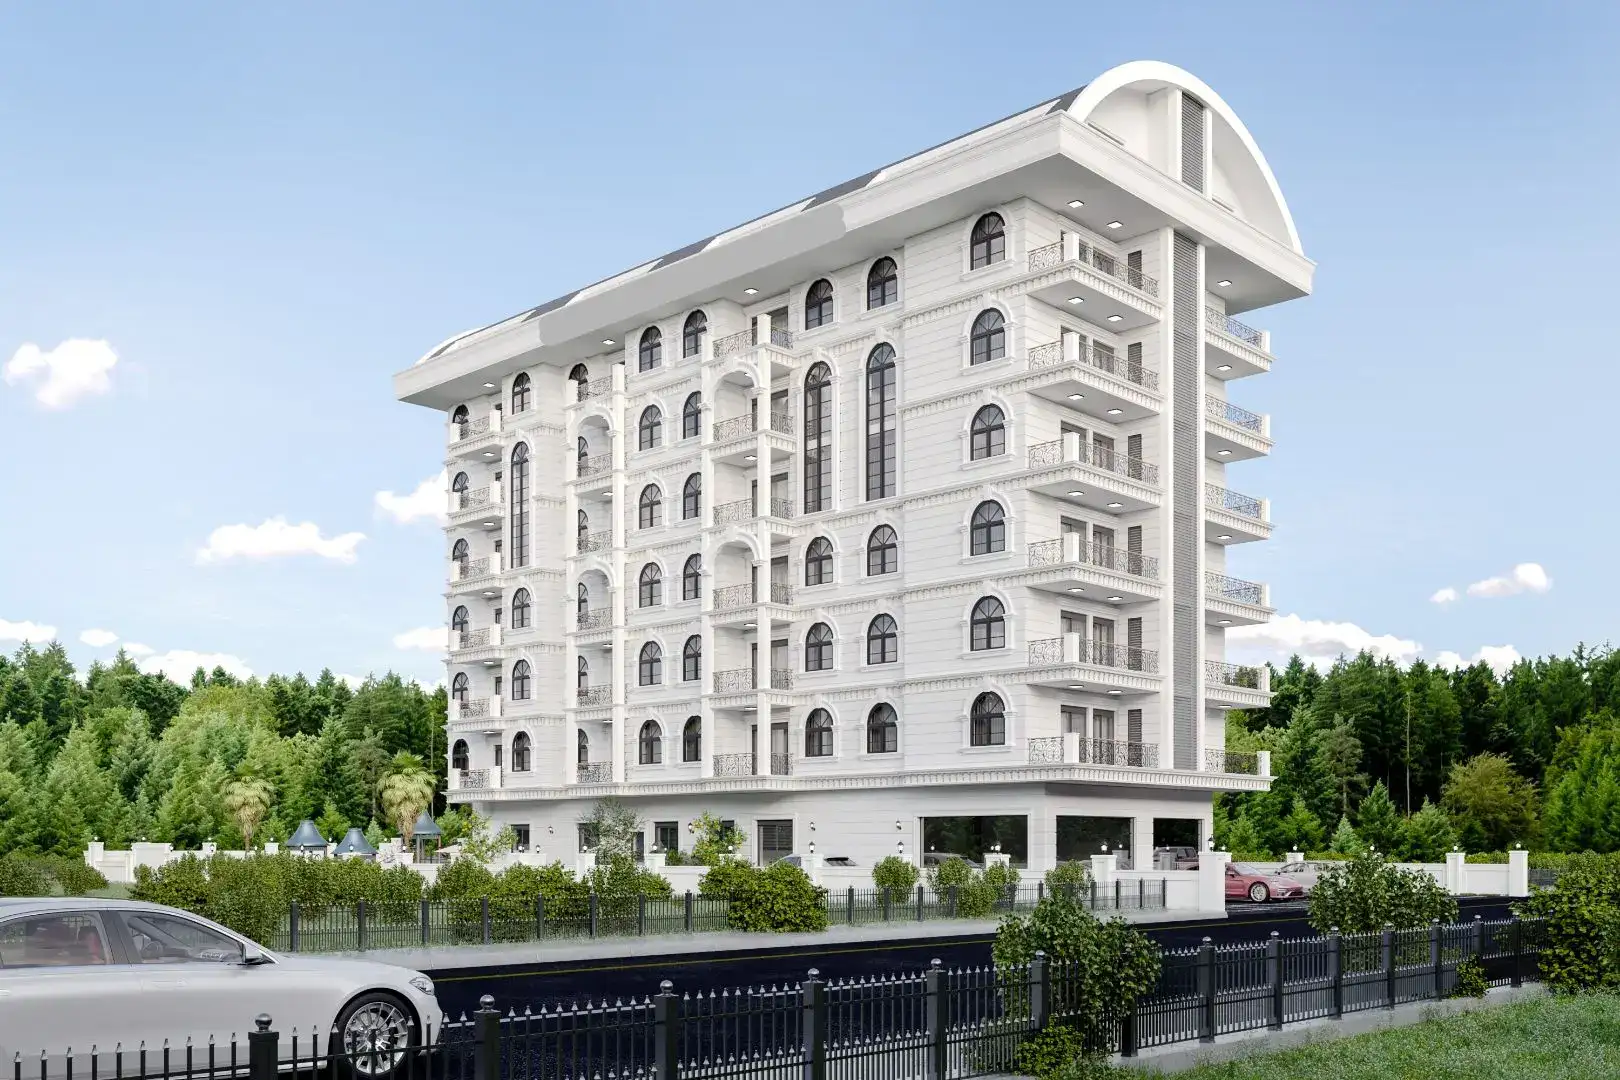 NEW PREMIUM PROJECT WITH AN EXCELLENT LOCATION IN THE CENTER OF ALANYA